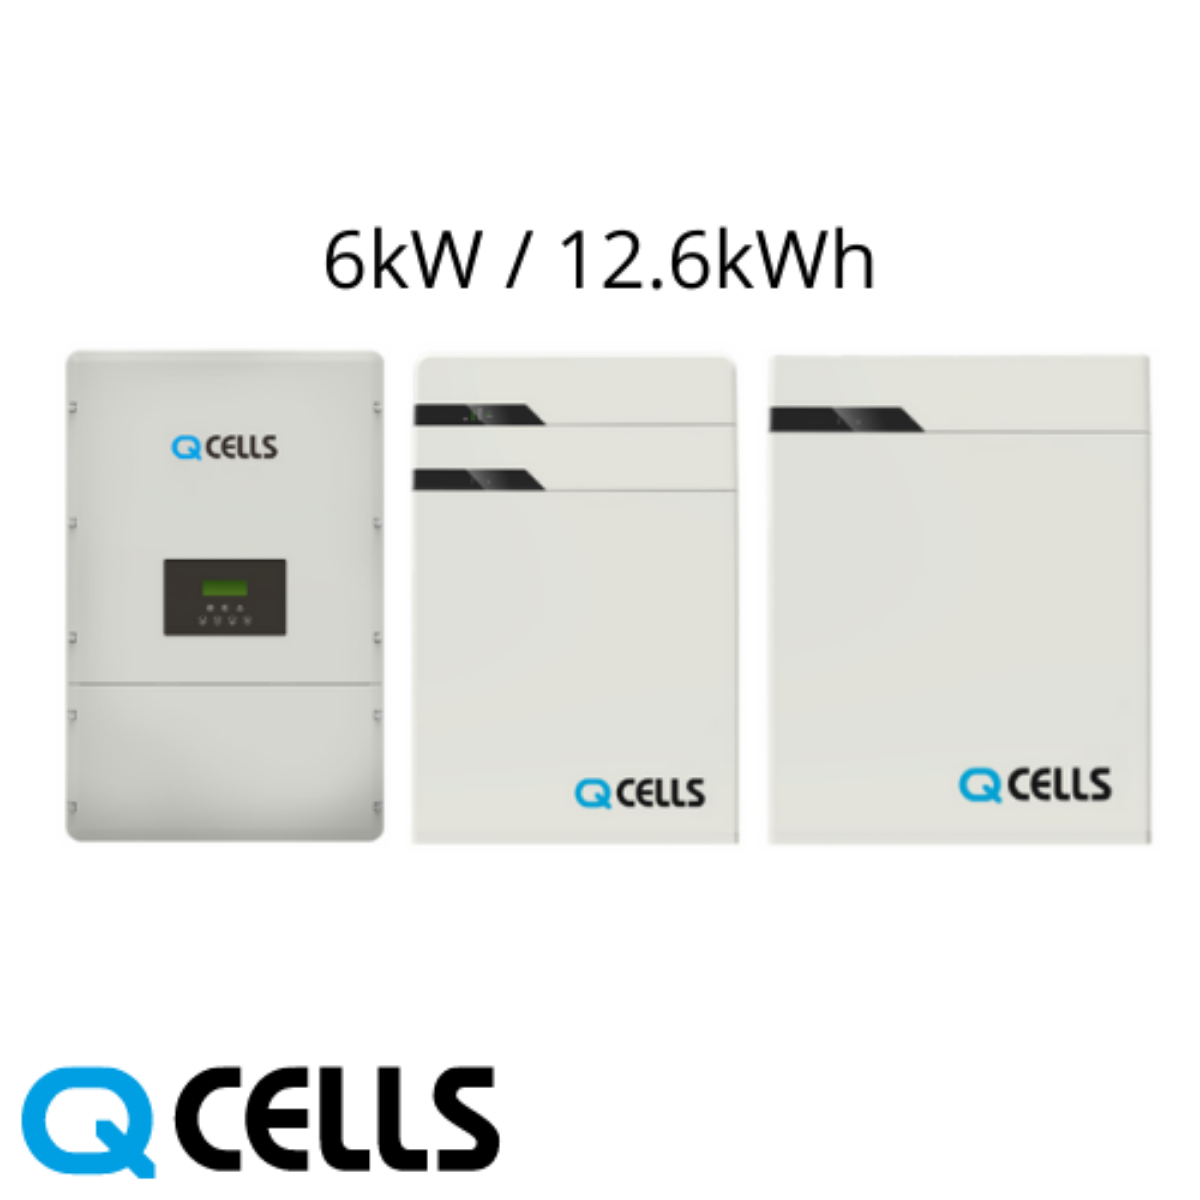 Q Cells Q.Home+ 6kW Inverter / 12.6kWh Lithium Ion Battery ESS